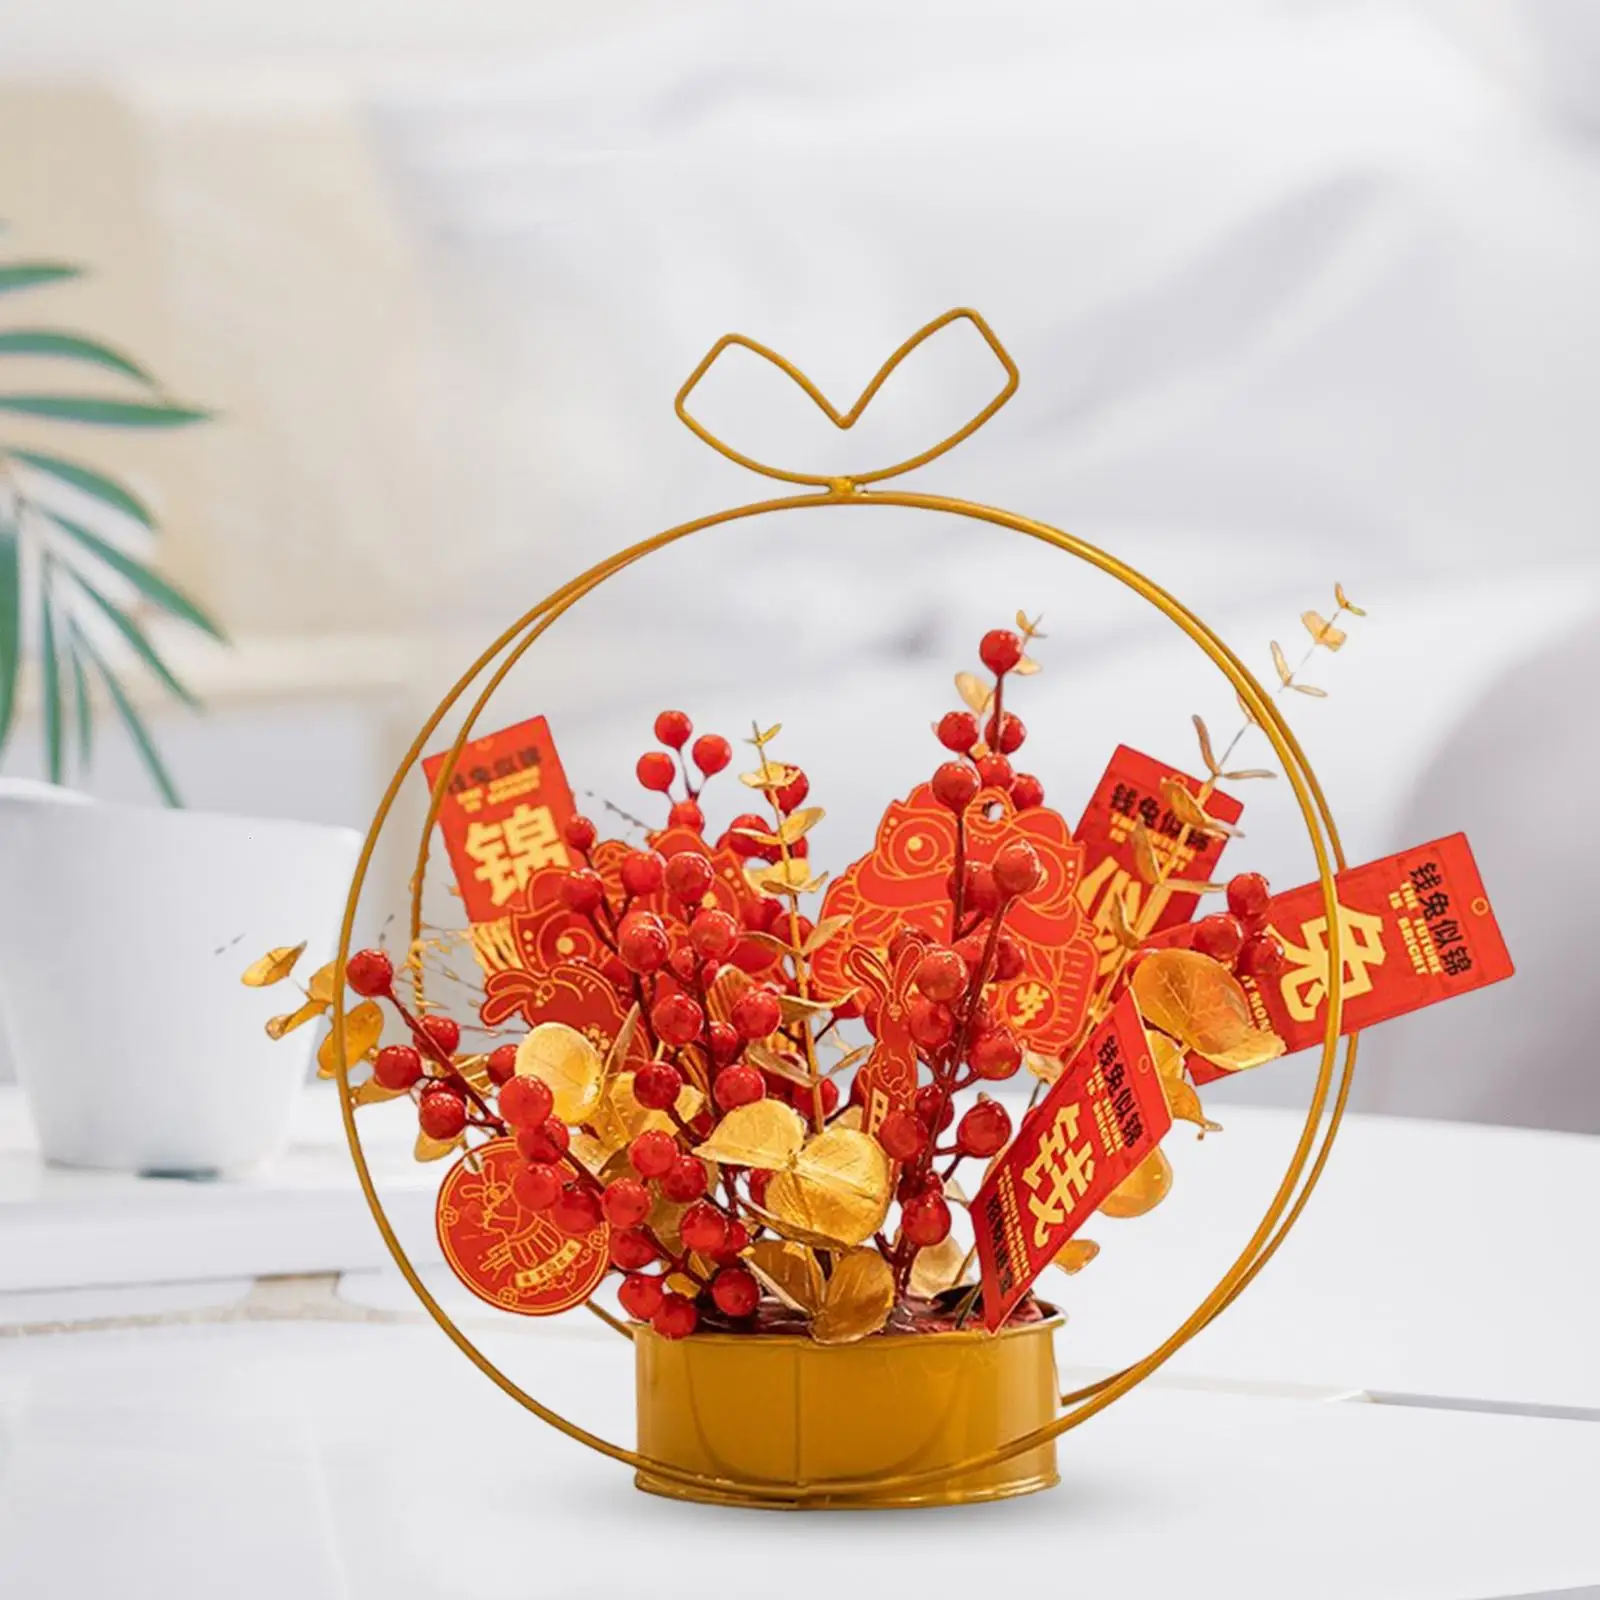 Chinese Flower Basket Ornament Spring Festival Photo Props New Year Decorative for Home Living Room Decor